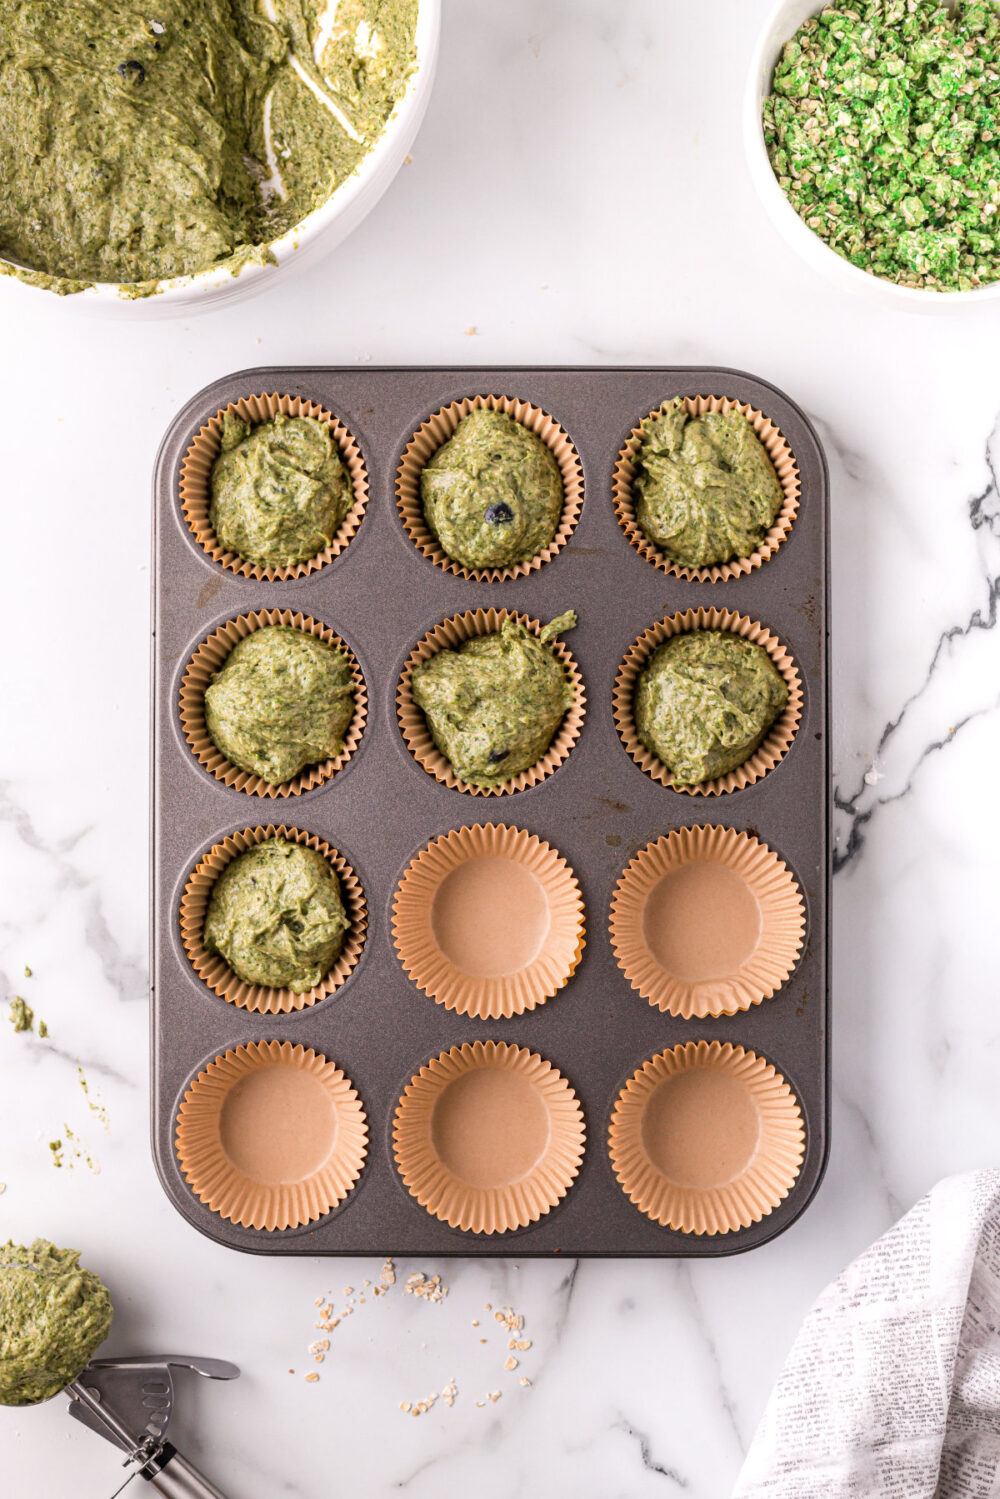 Filling muffin cups with spinach banana batter. 